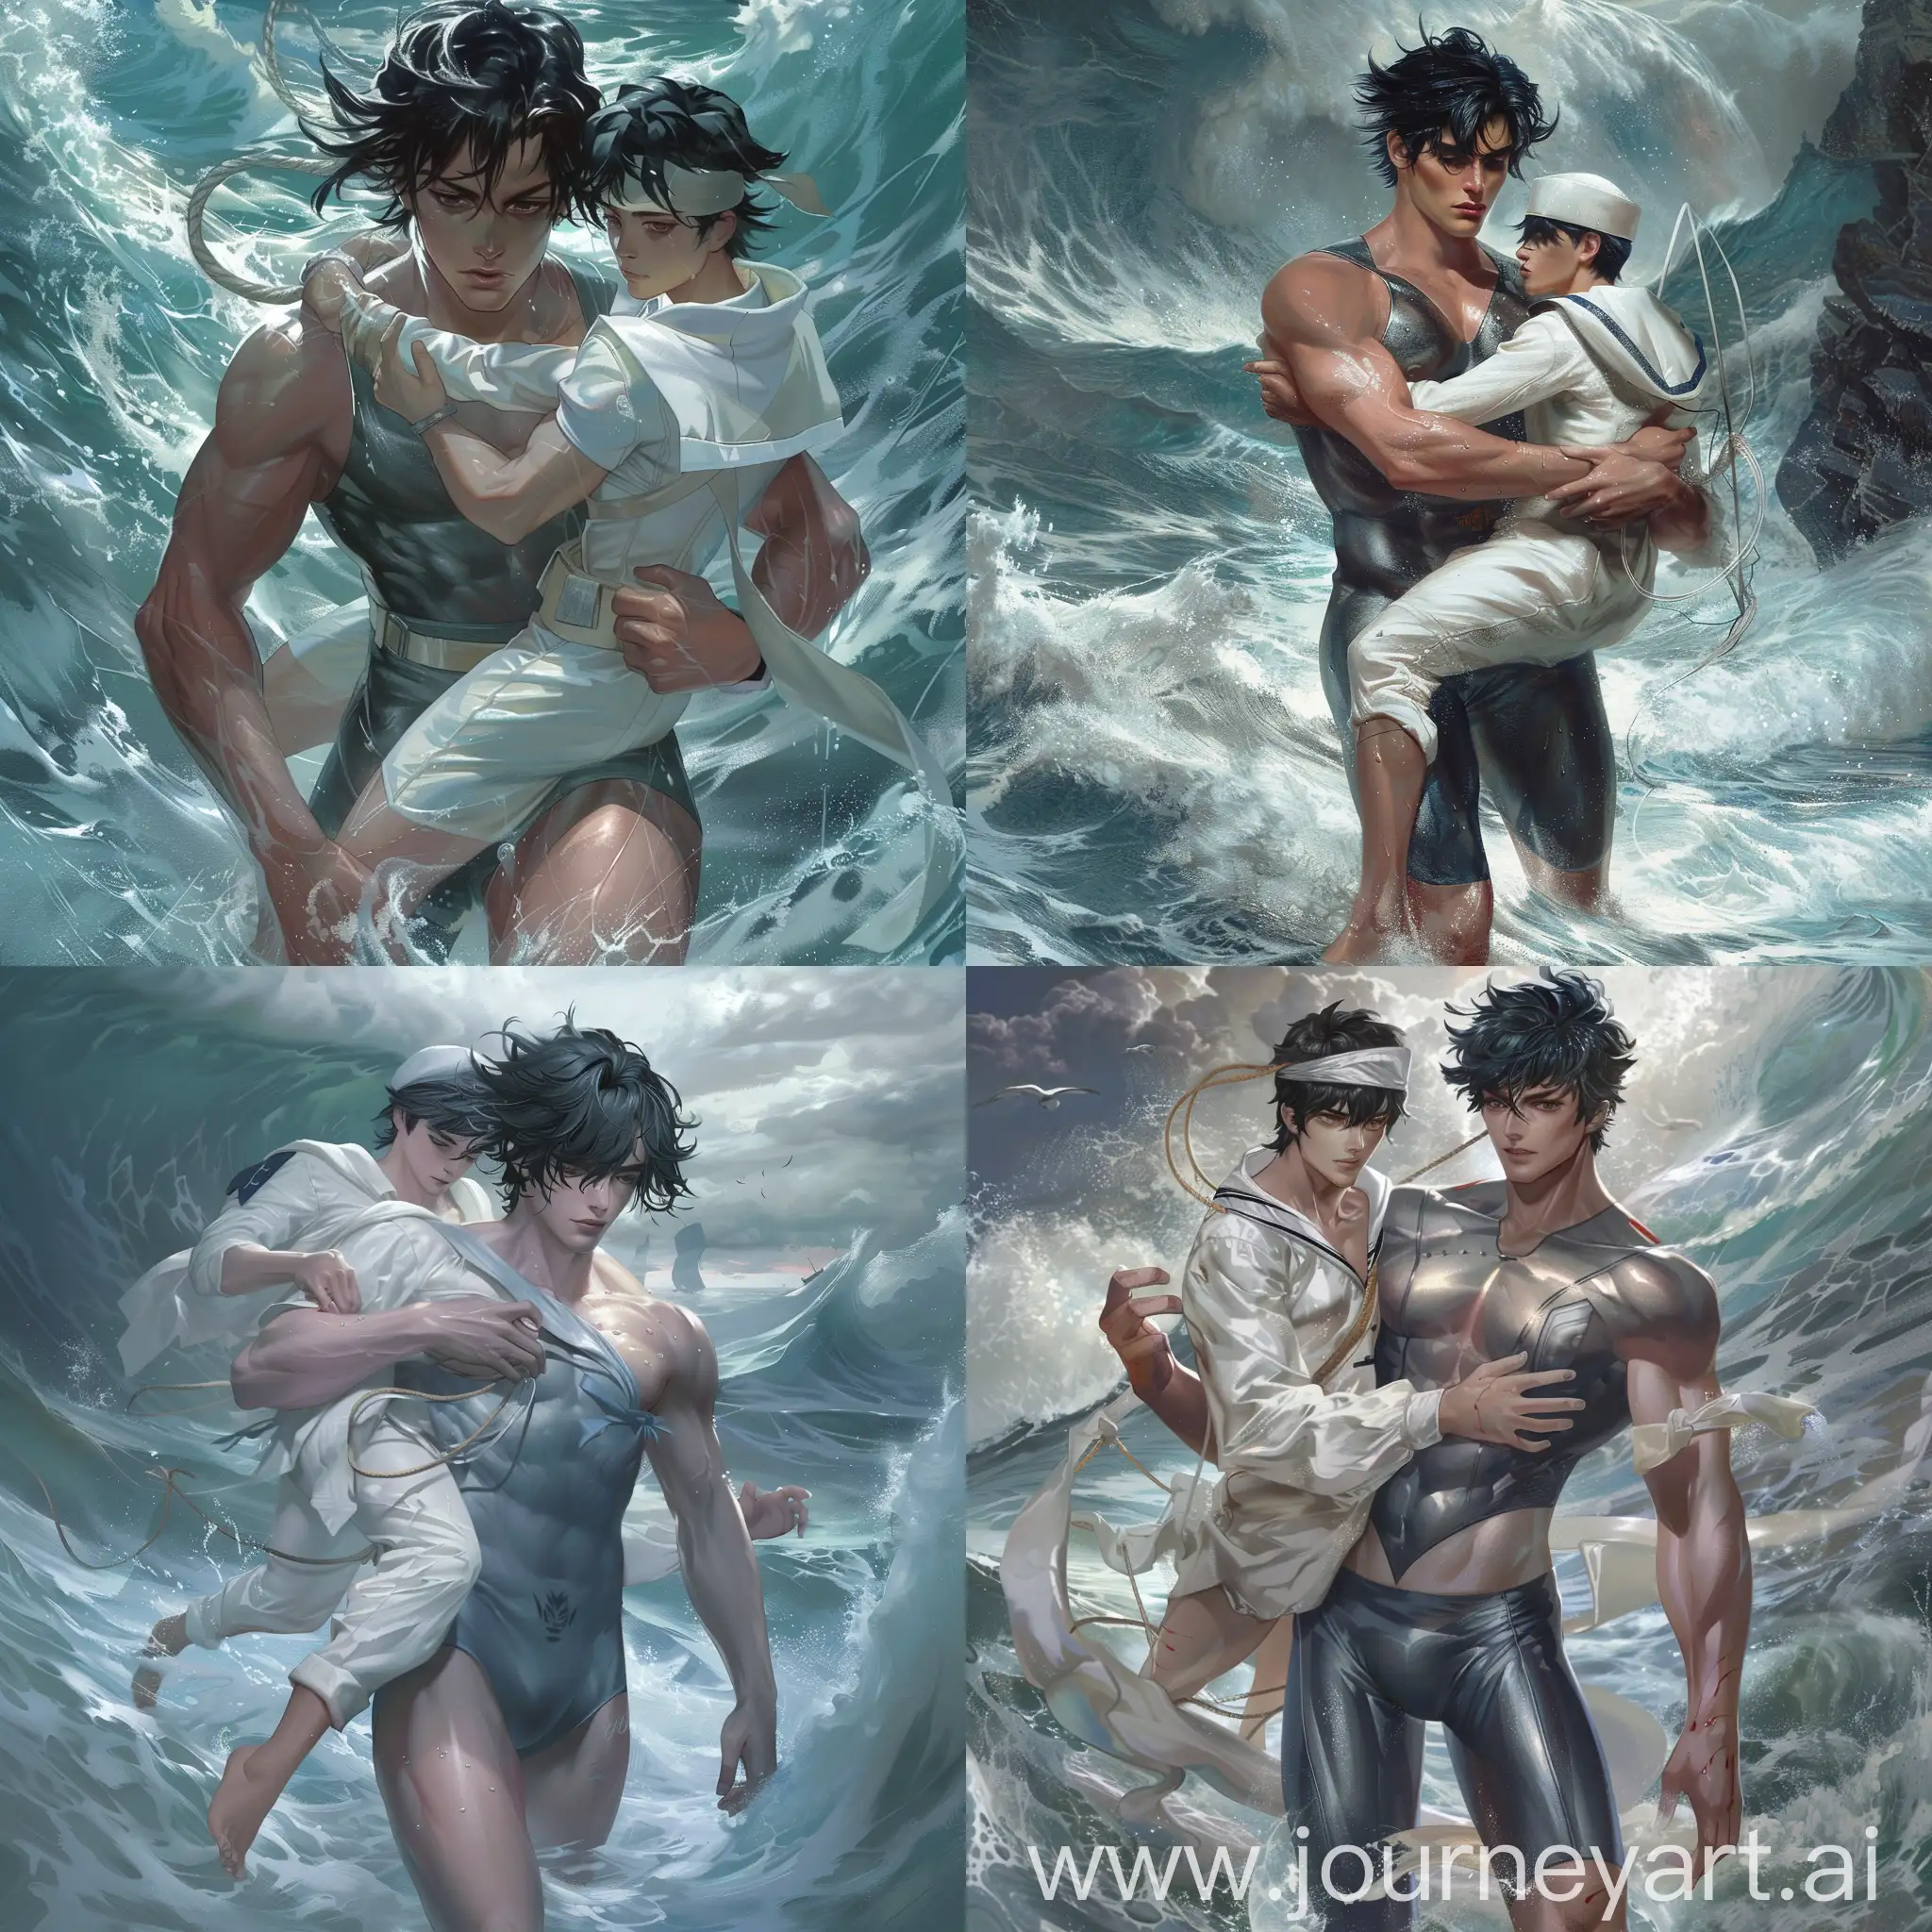 strong young male, black hair, siver swimming suit, holding a male sailor in white outfit in his arms, standing in a wild sea